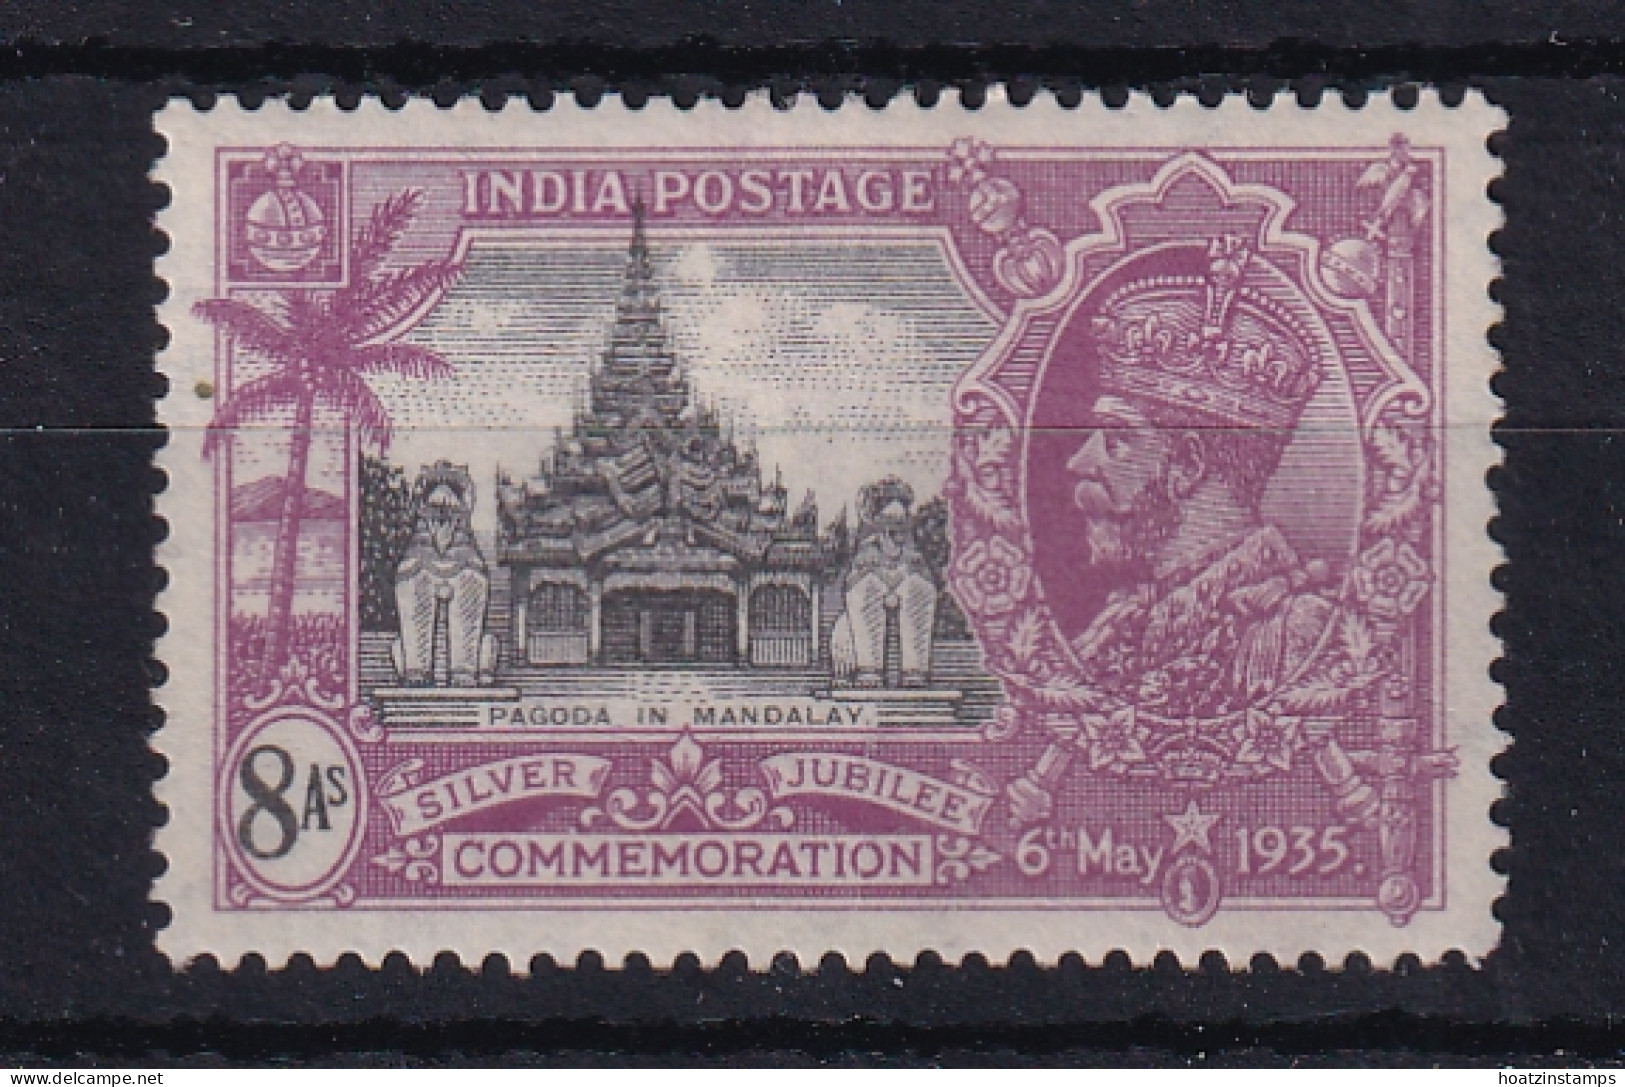 India: 1935   Silver Jubilee      SG246w    8a   [Wmk: Stars Pointing Left]   MH  - 1911-35 King George V